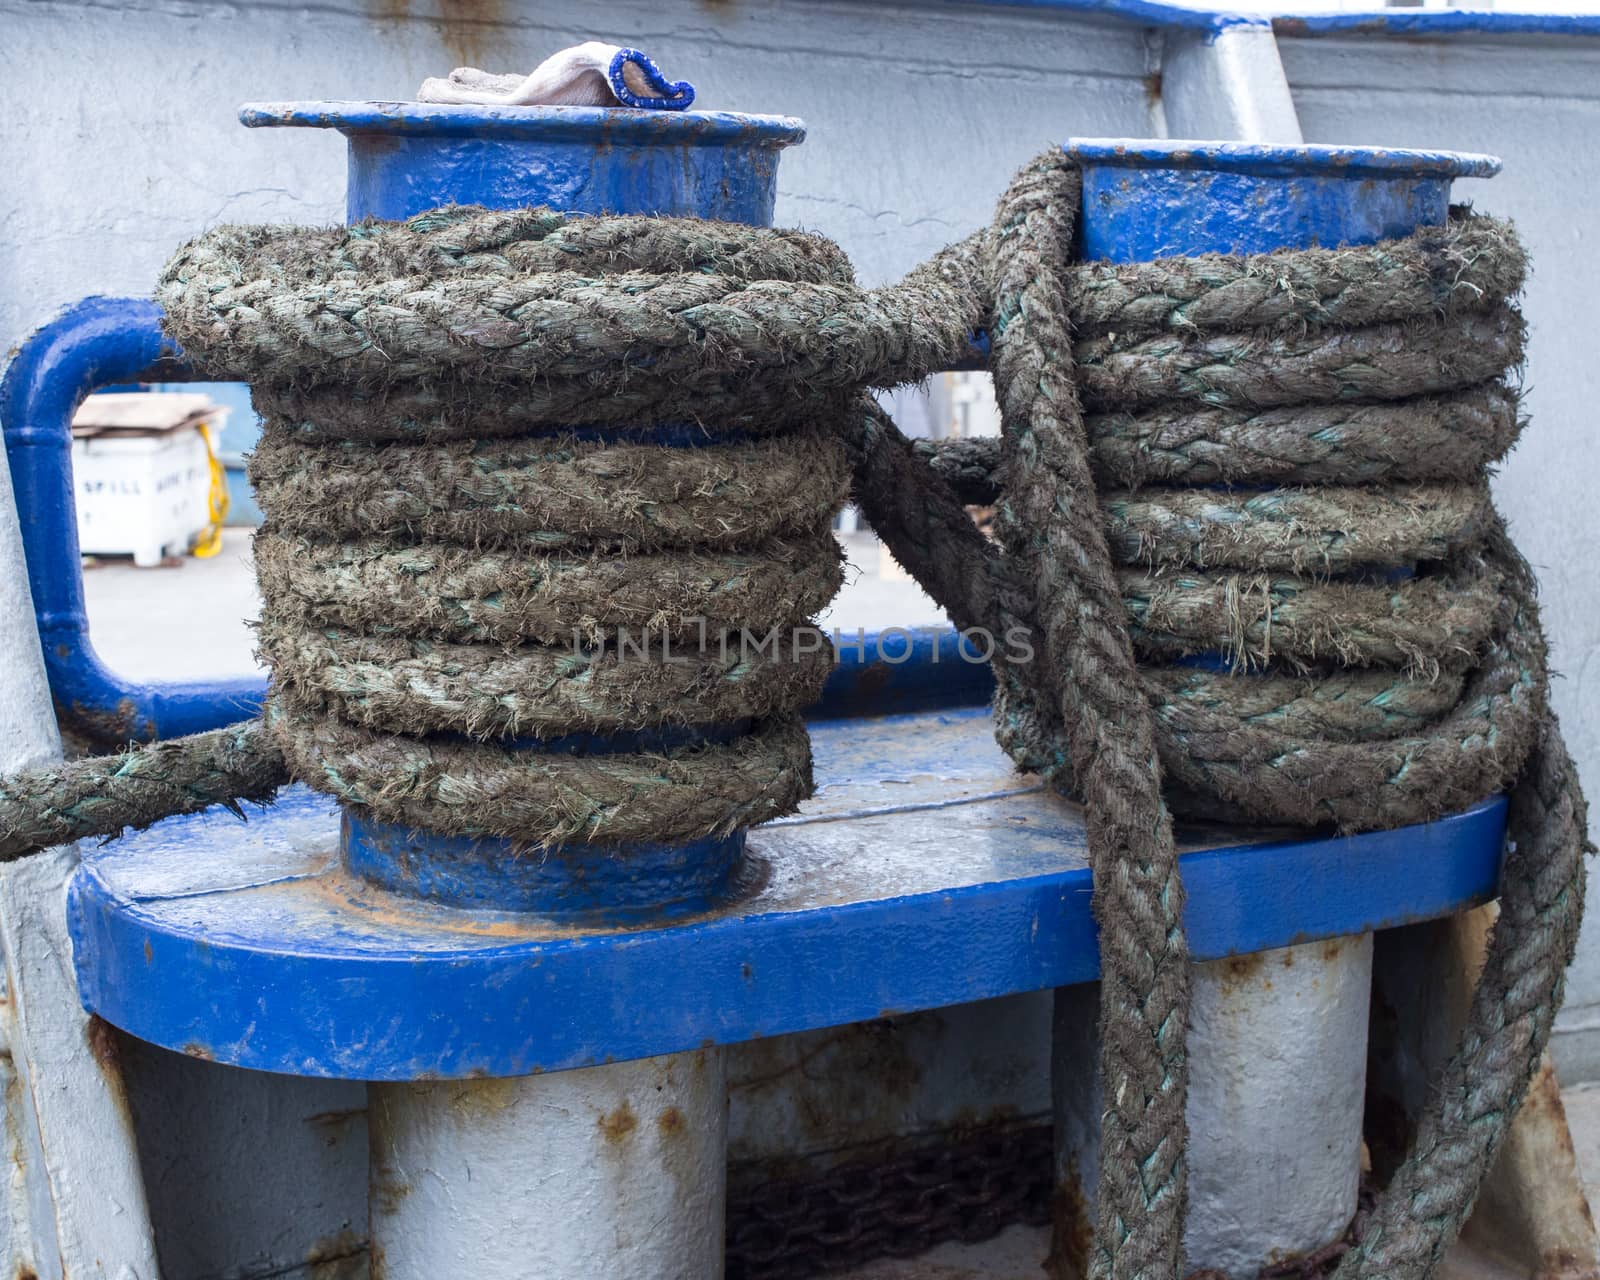 Rope tied to a ship's bit